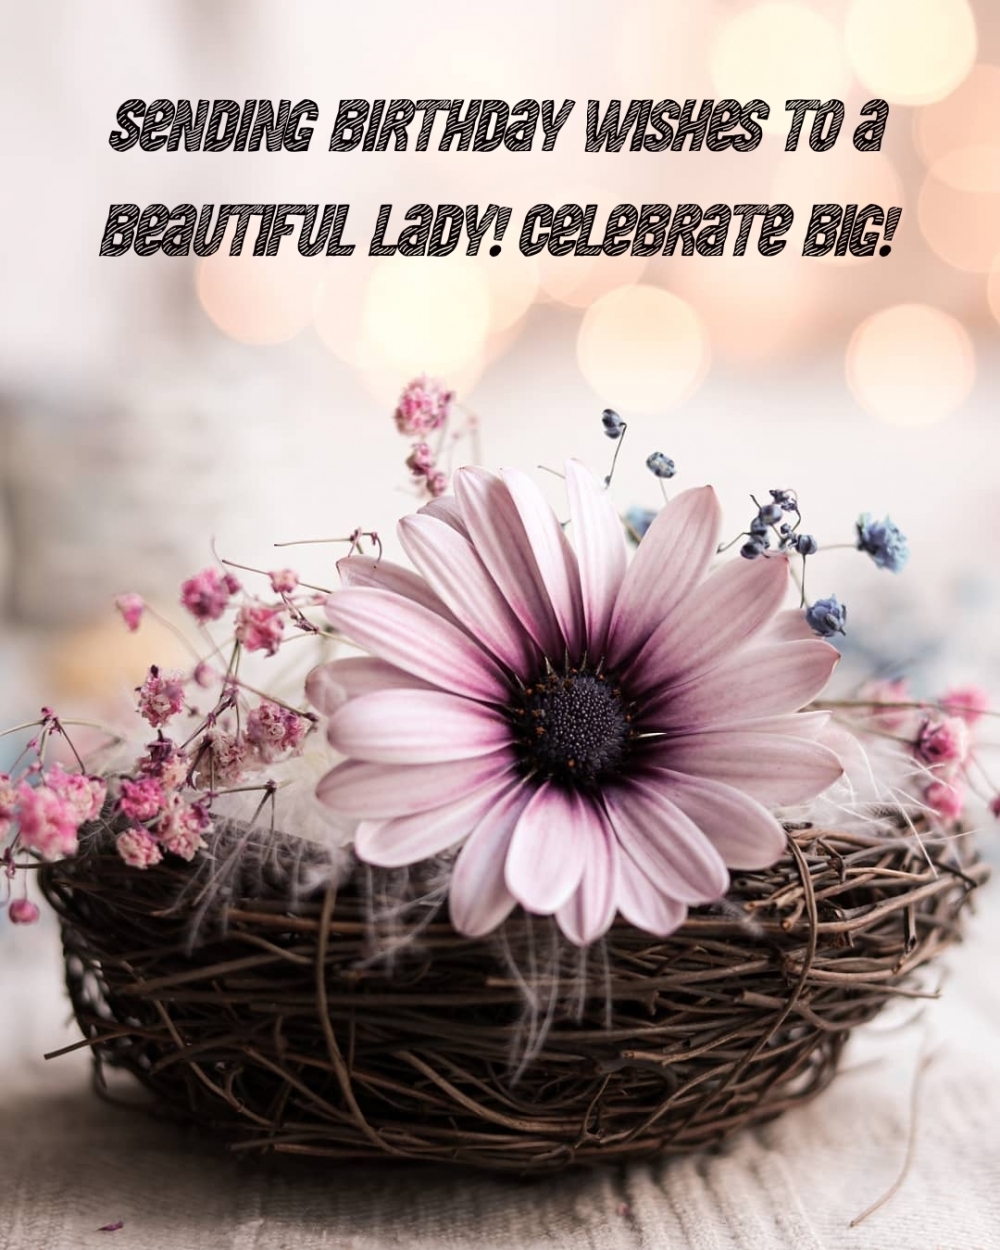 Picture: Hey beautiful lady, wishing you a fabulous birthday today!